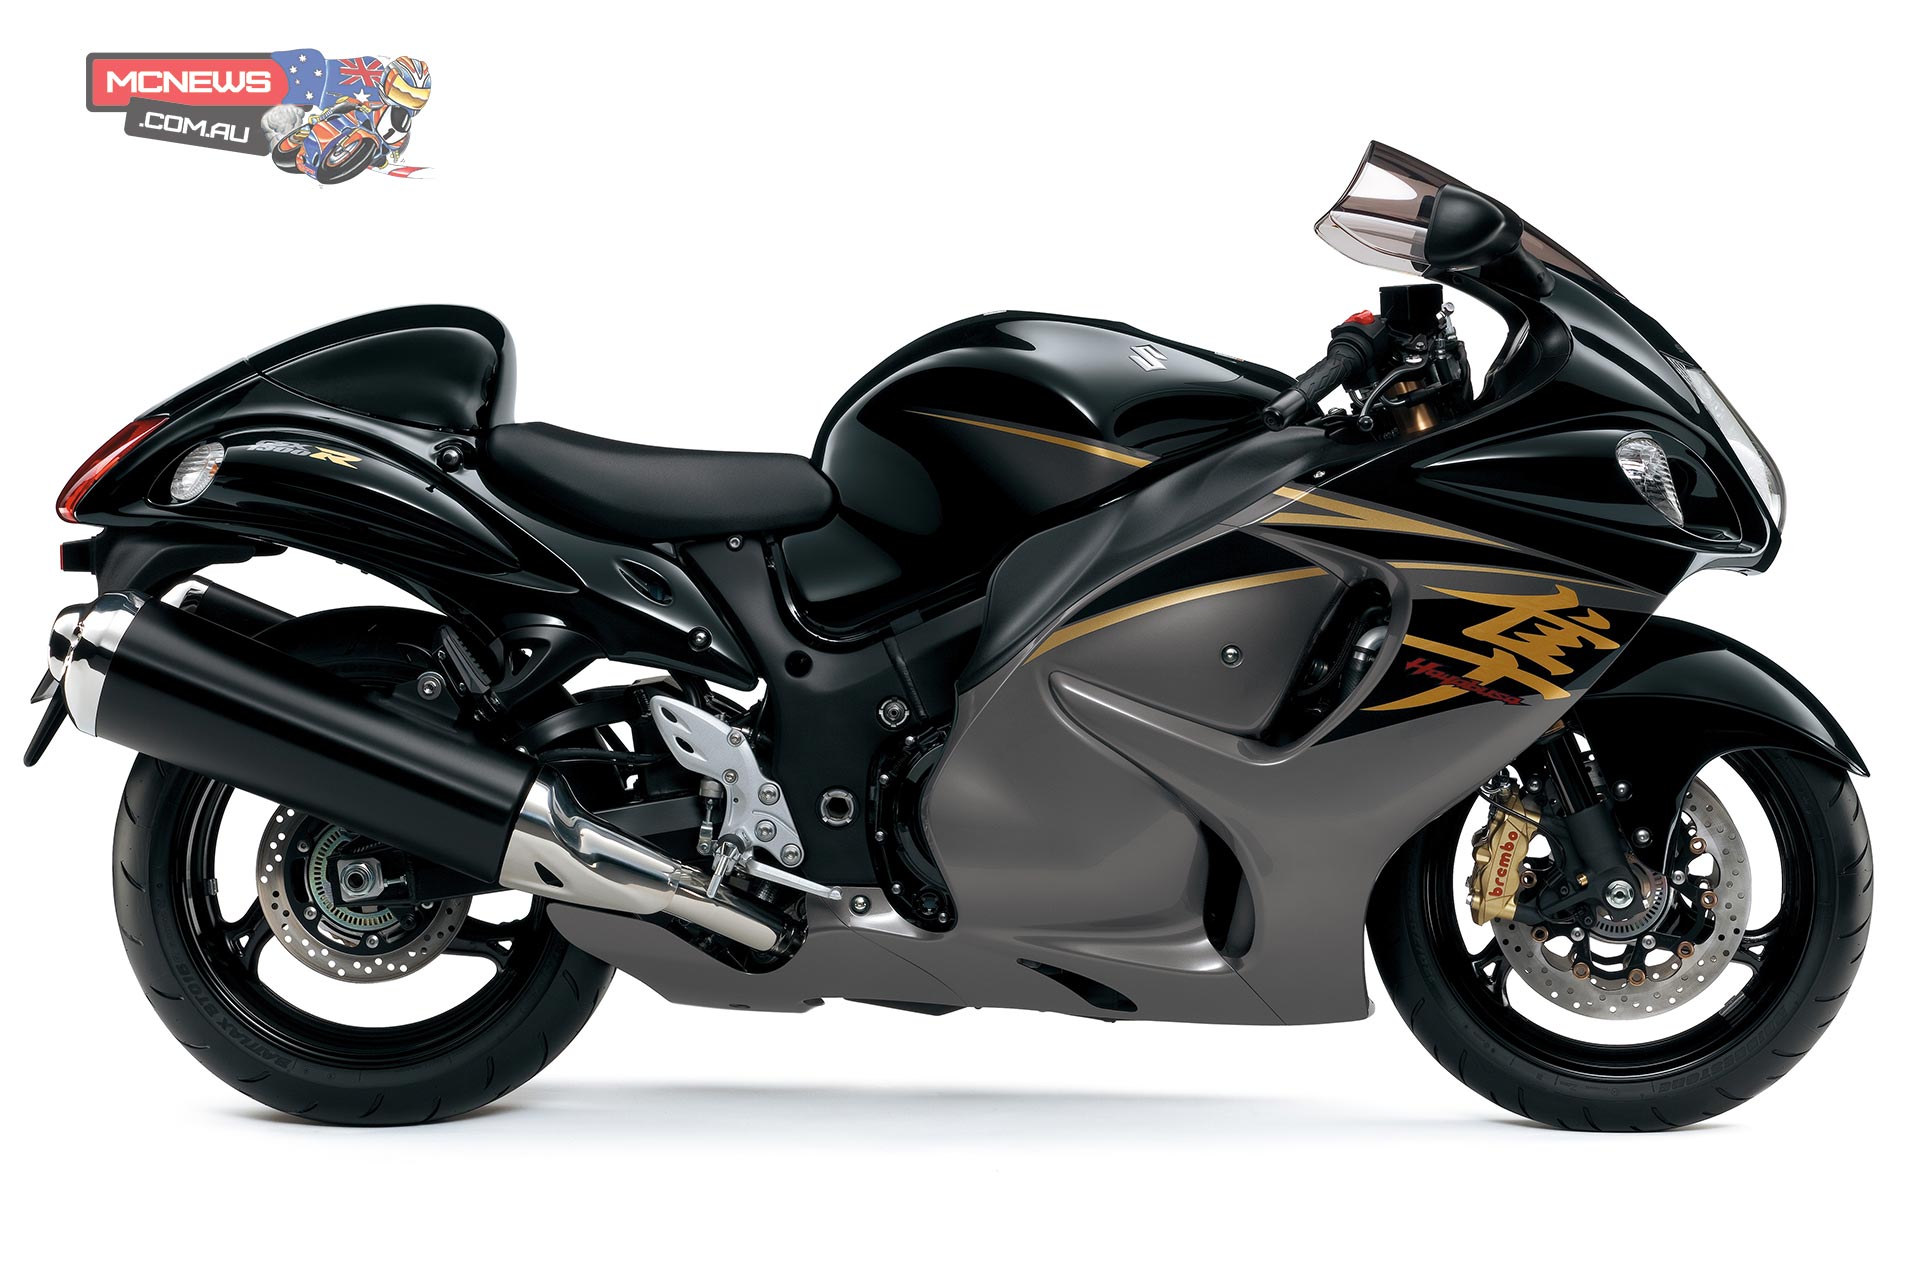 What are some features of the Suzuki Hayabusa GSX1300R?